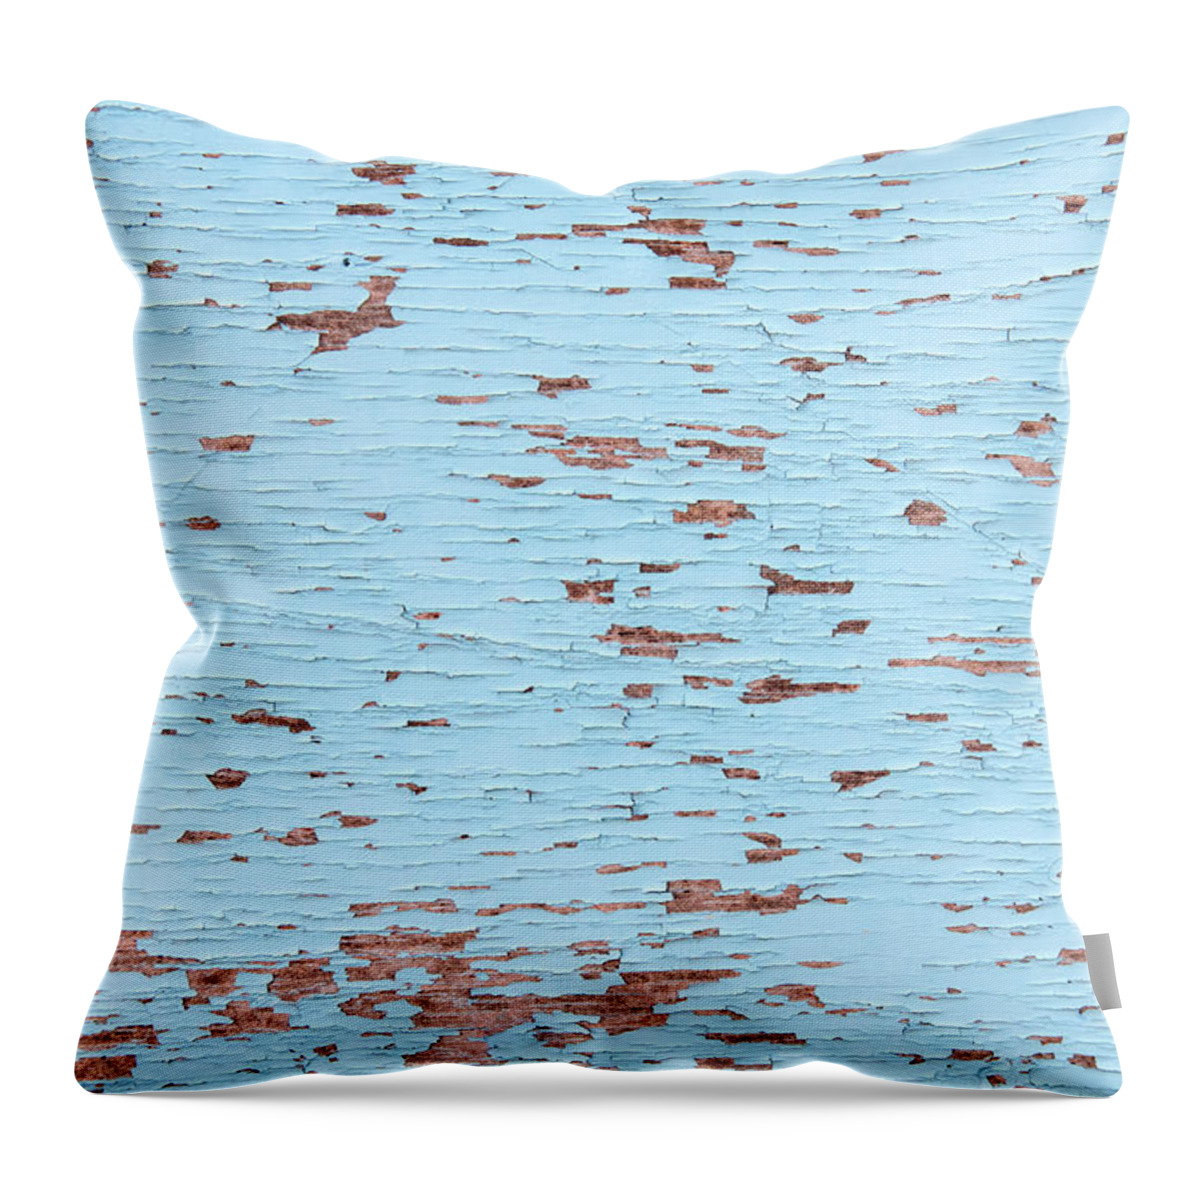 Abstract Throw Pillow featuring the photograph Blue wooden background by Michalakis Ppalis